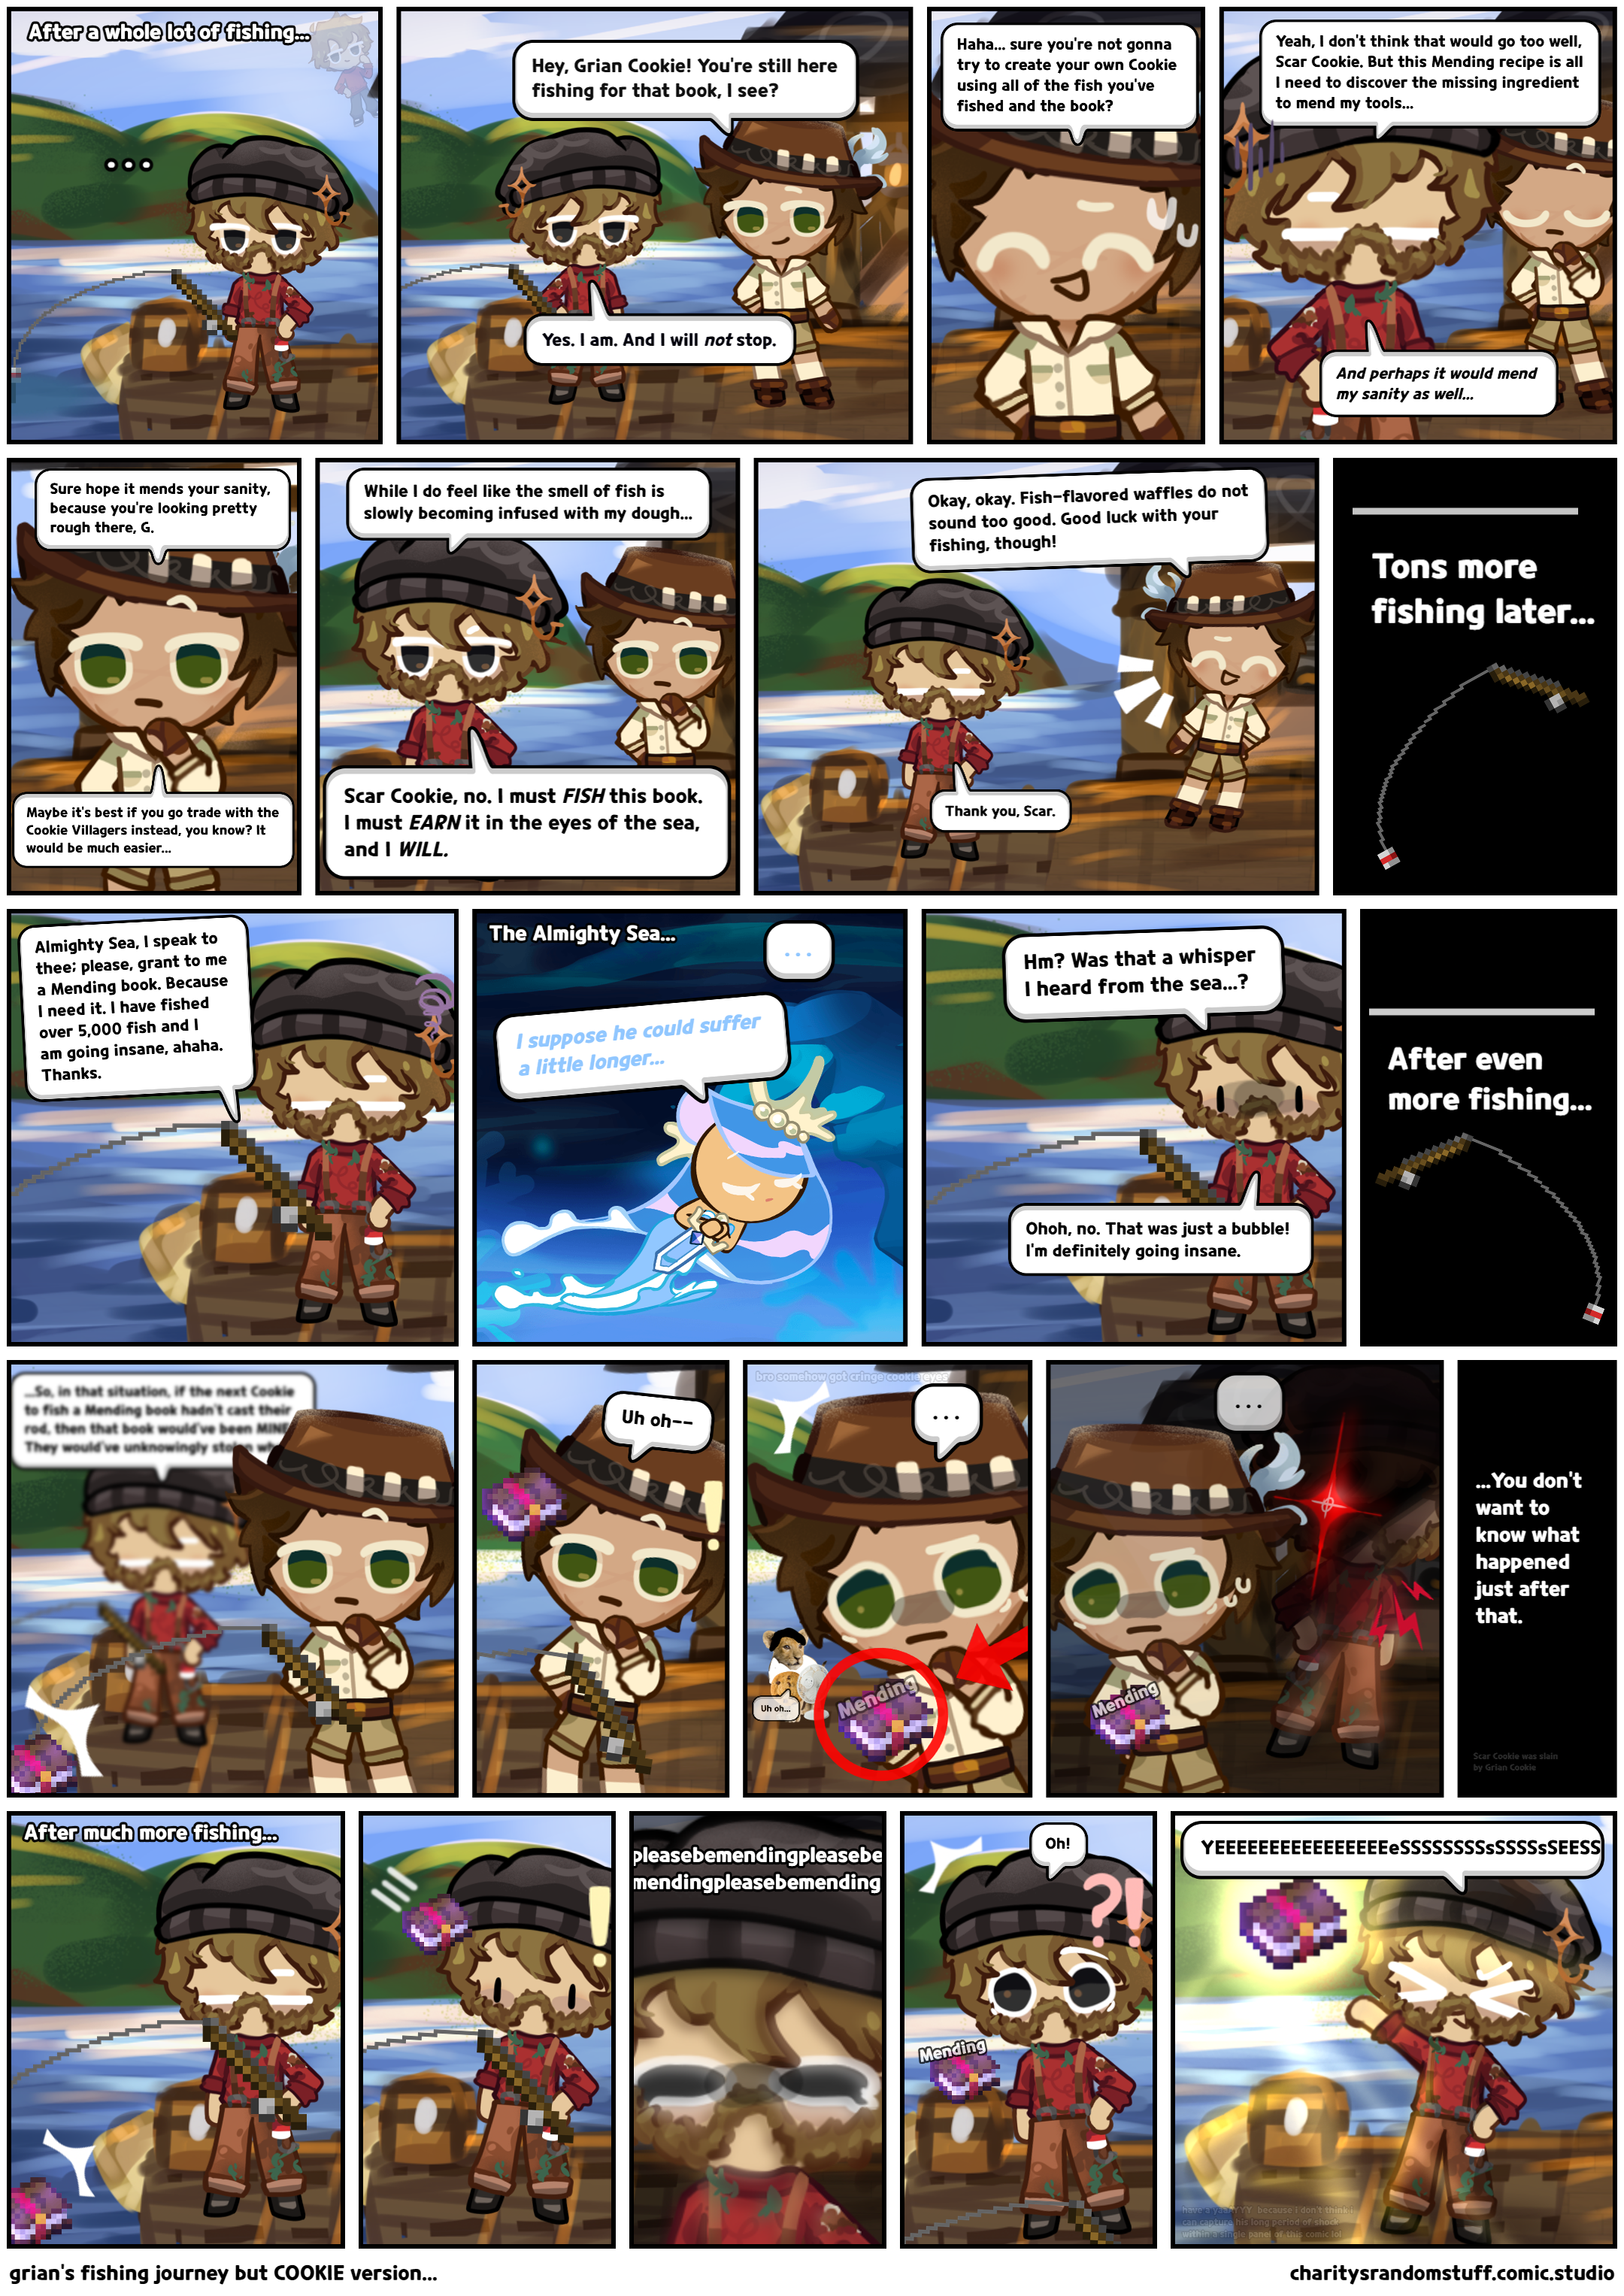 grian's fishing journey but COOKIE version...